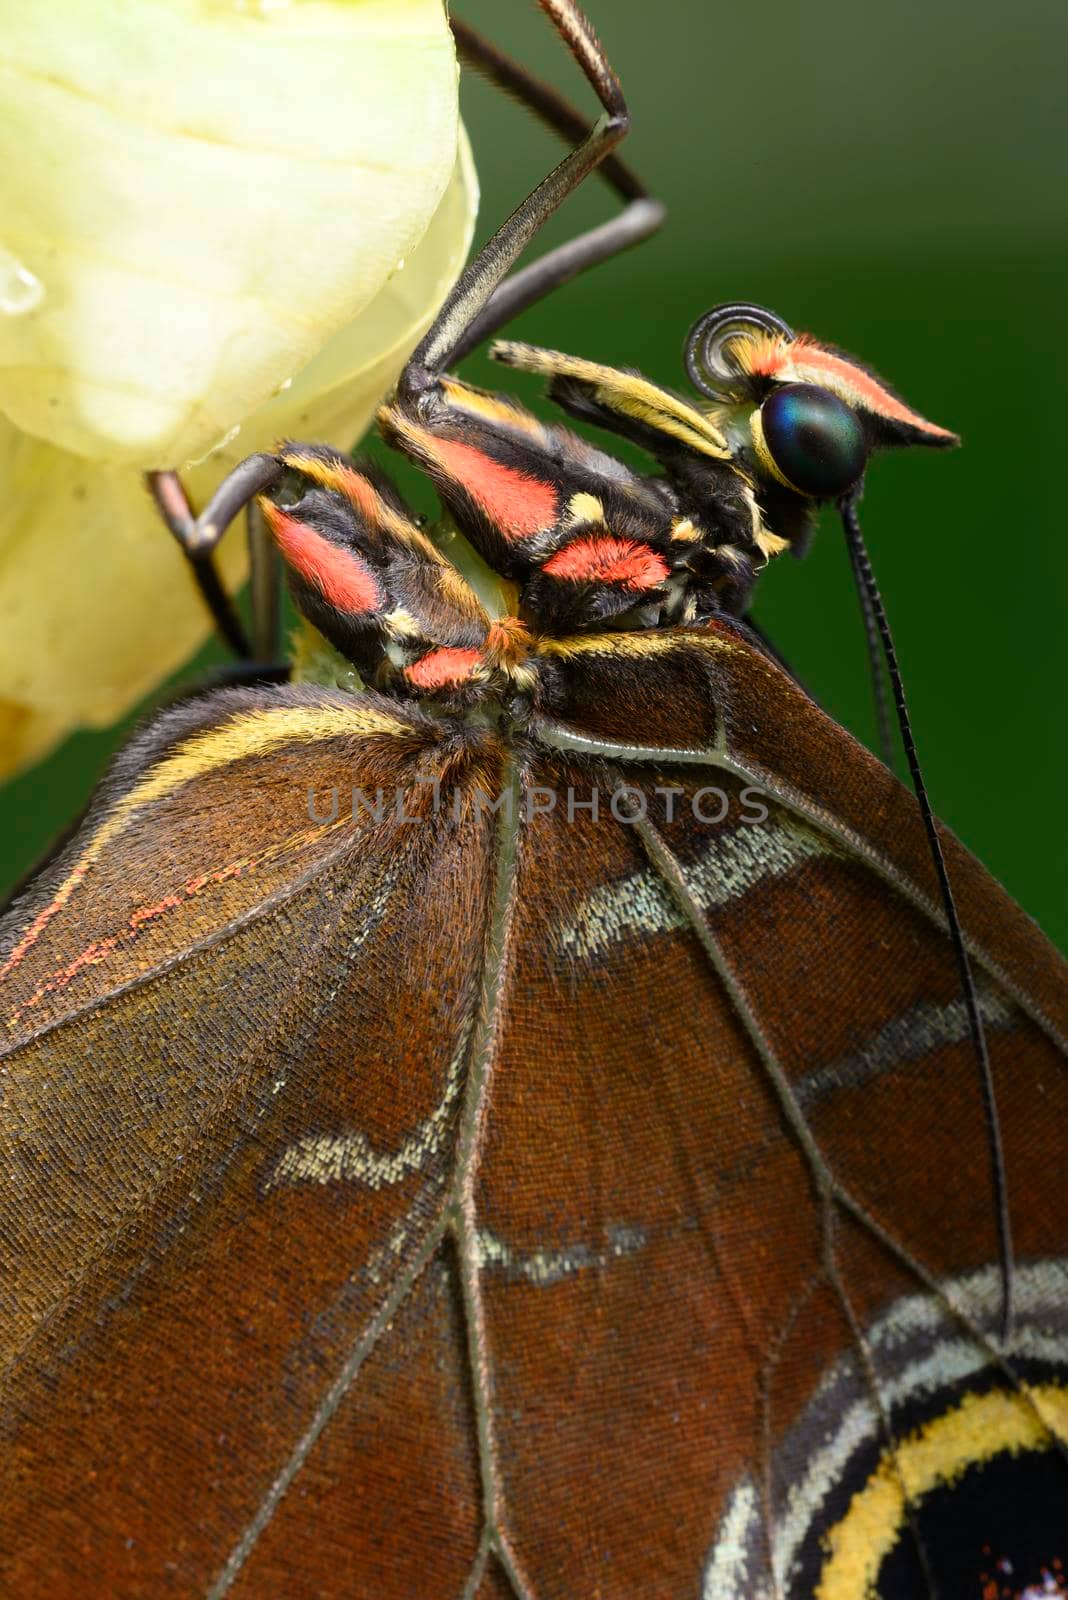 Close up of Morpho butterfly coming out of chrysalis by AlessandroZocc